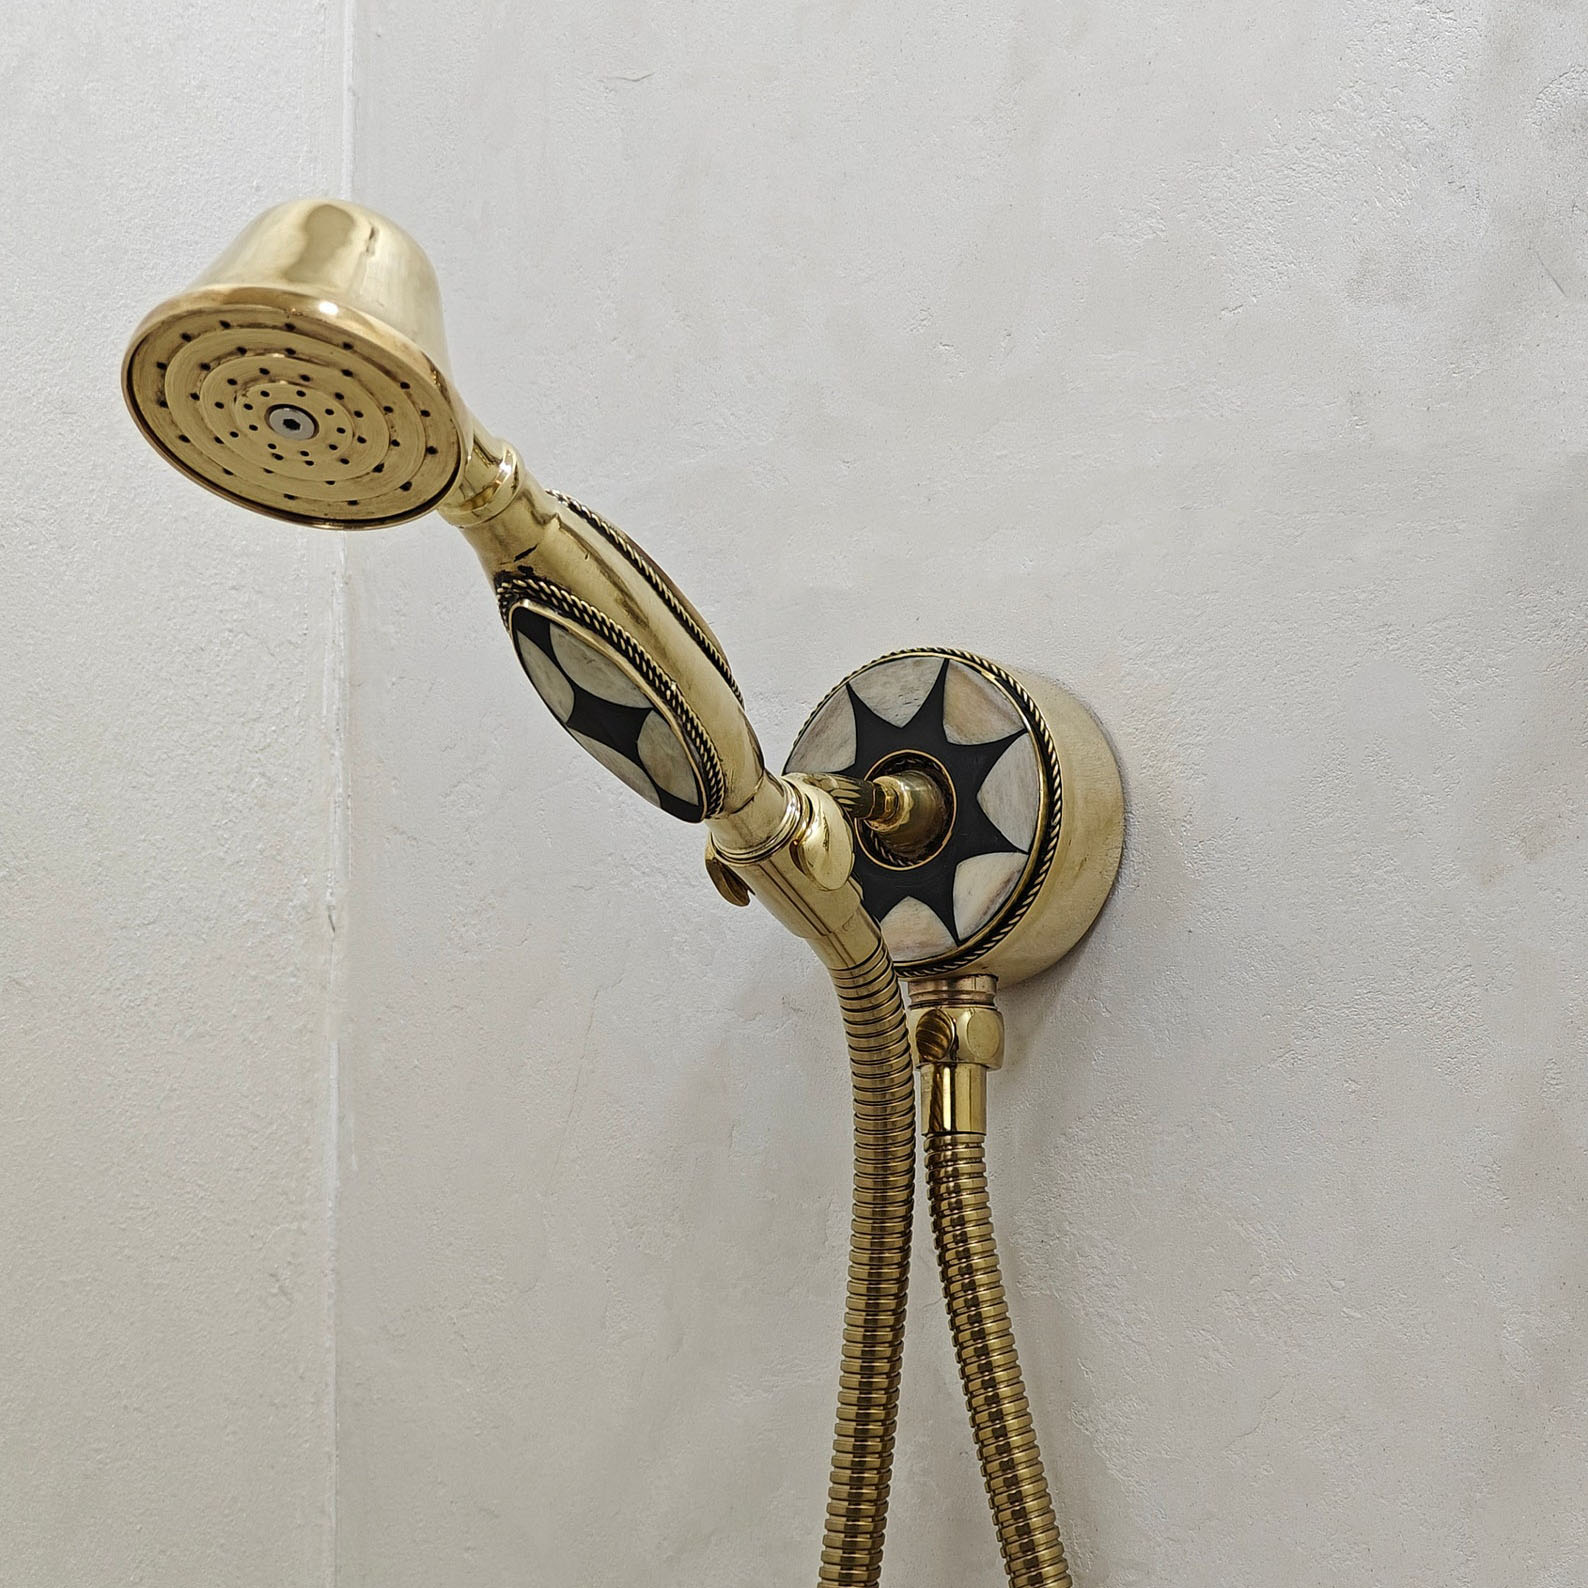 Unlacquered Brass ShowerHead, HandHeld Sprayer and Tub Faucet Set